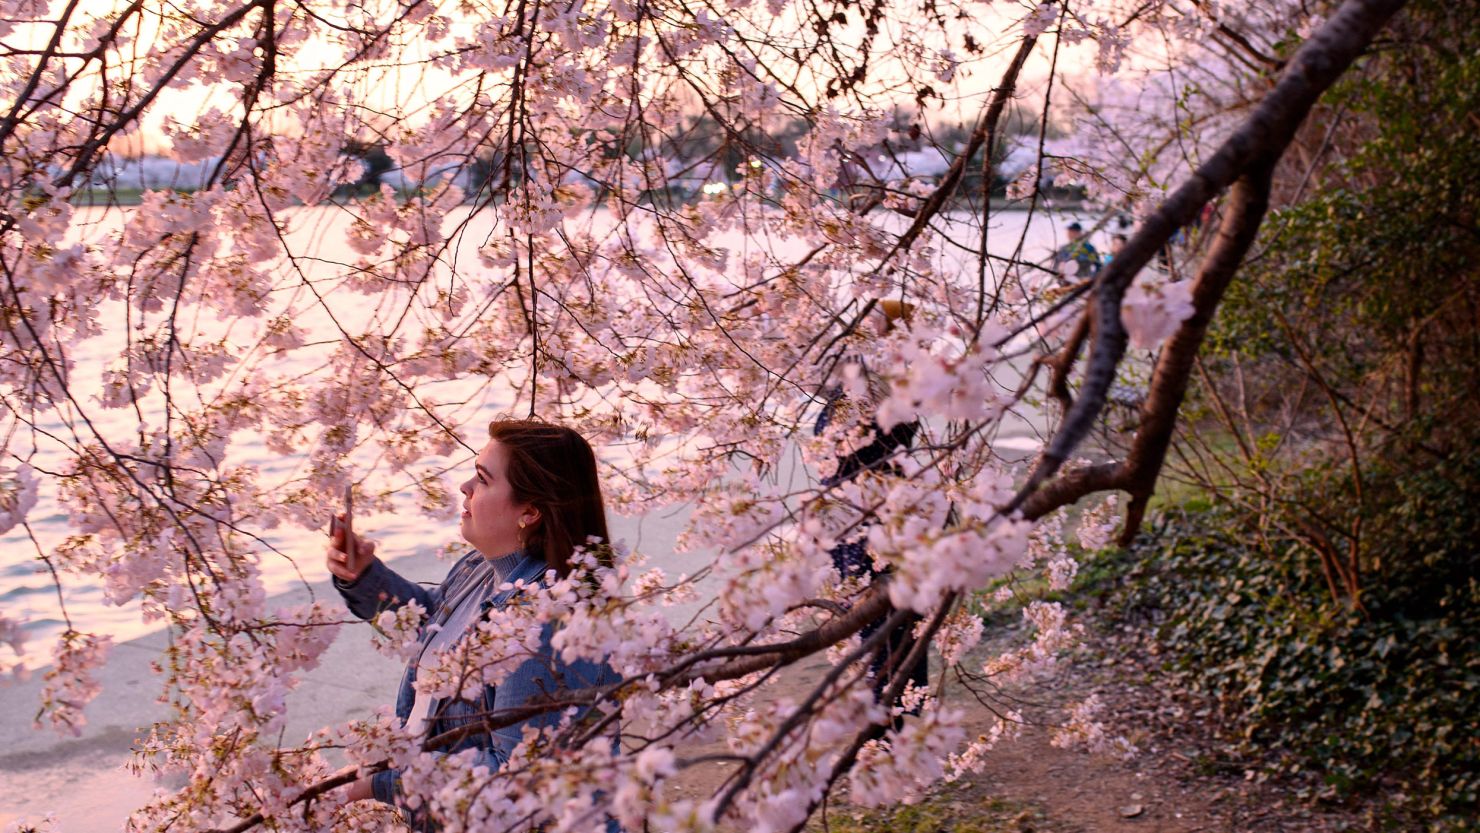 A woman takes pictures of cherry blossoms last year as the sun rises at the Tidal Basin on March 23, 2022. This year's peak bloom could be well ahead of schedule thanks to unseasonably warm temperatures.